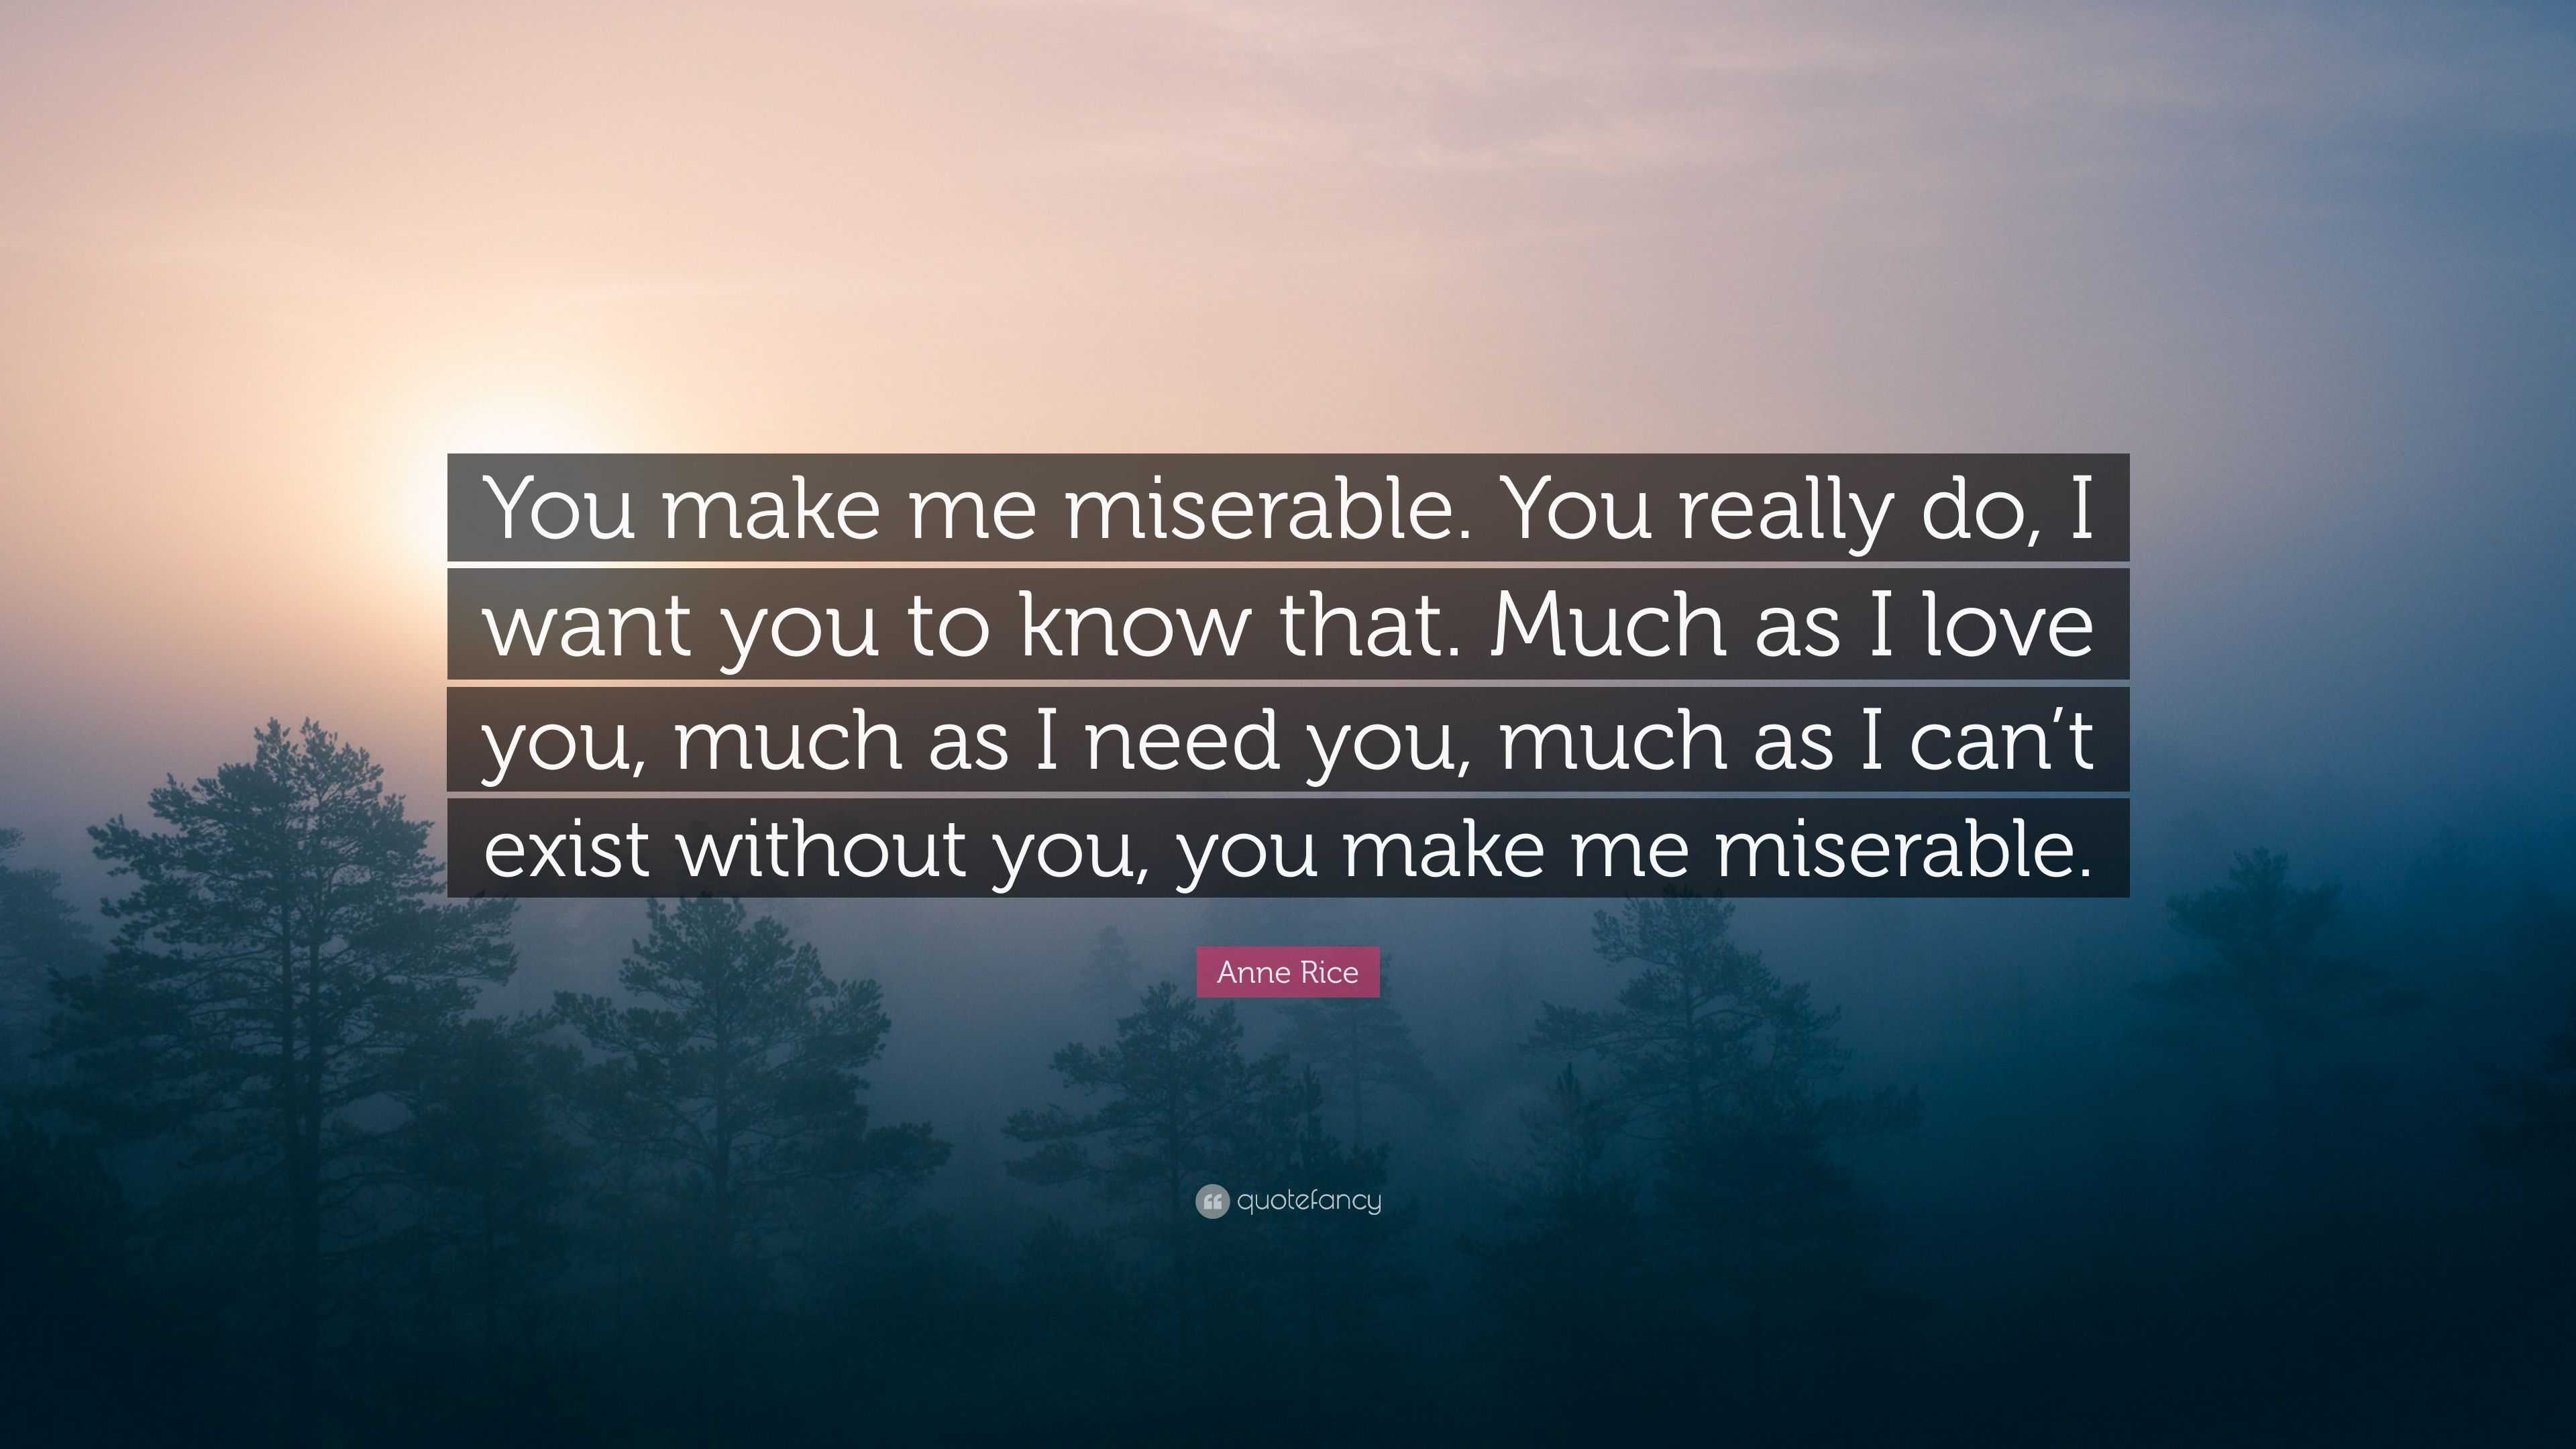 Anne Rice Quote “You make me miserable You really do I want